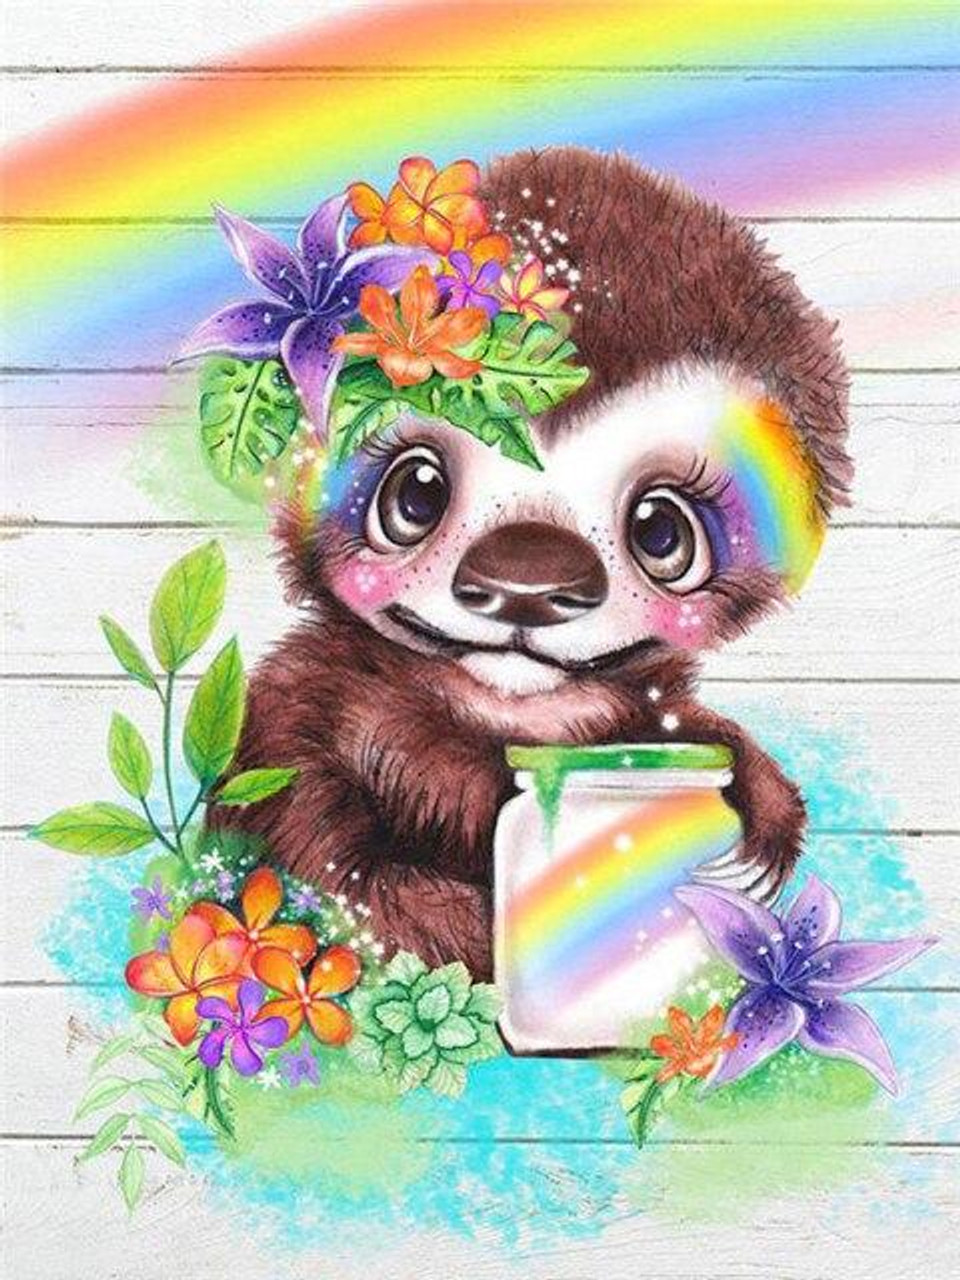 ParNarZar Easy 3D Diamond Painting Kit Sloth for Kids, Beginners Art Crafts  Kits for Girls with Frame 6x6inches